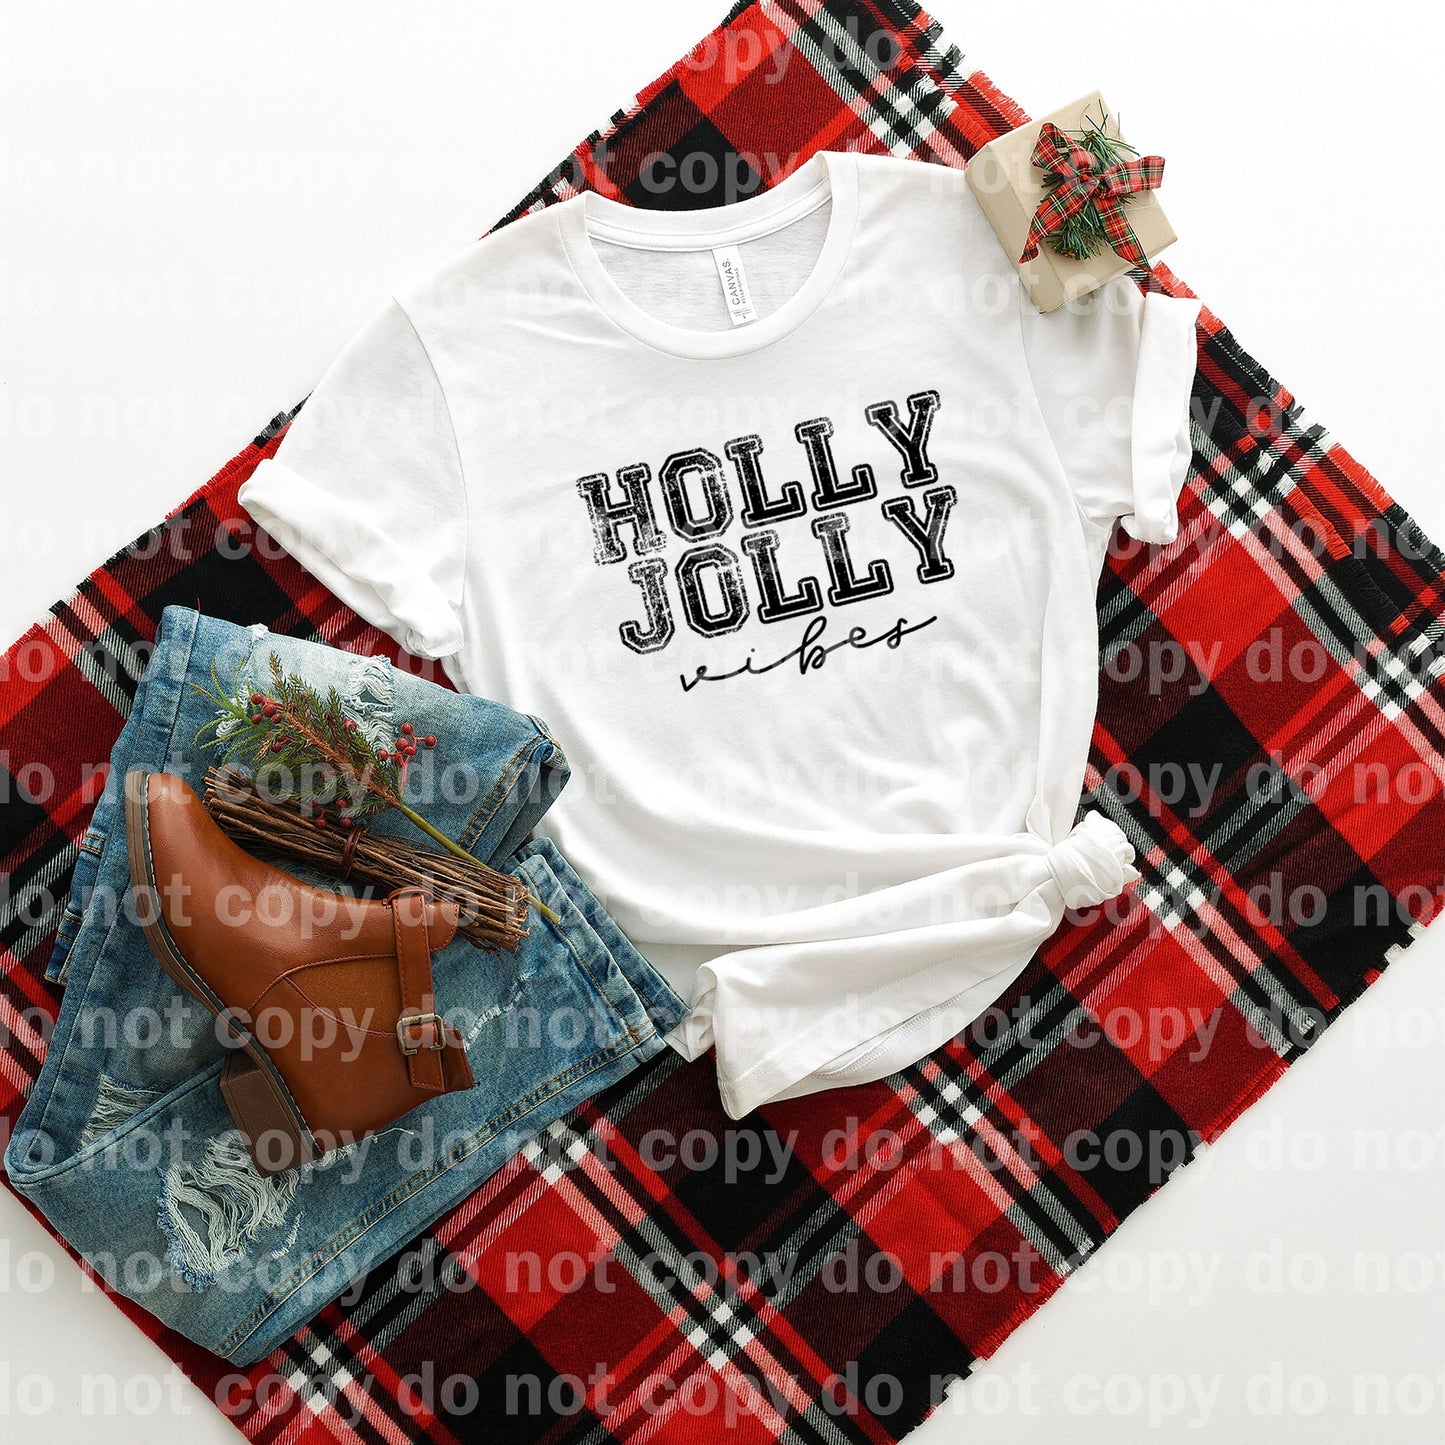 Holly Jolly Vibes Distressed Black/White Dream Print or Sublimation Print